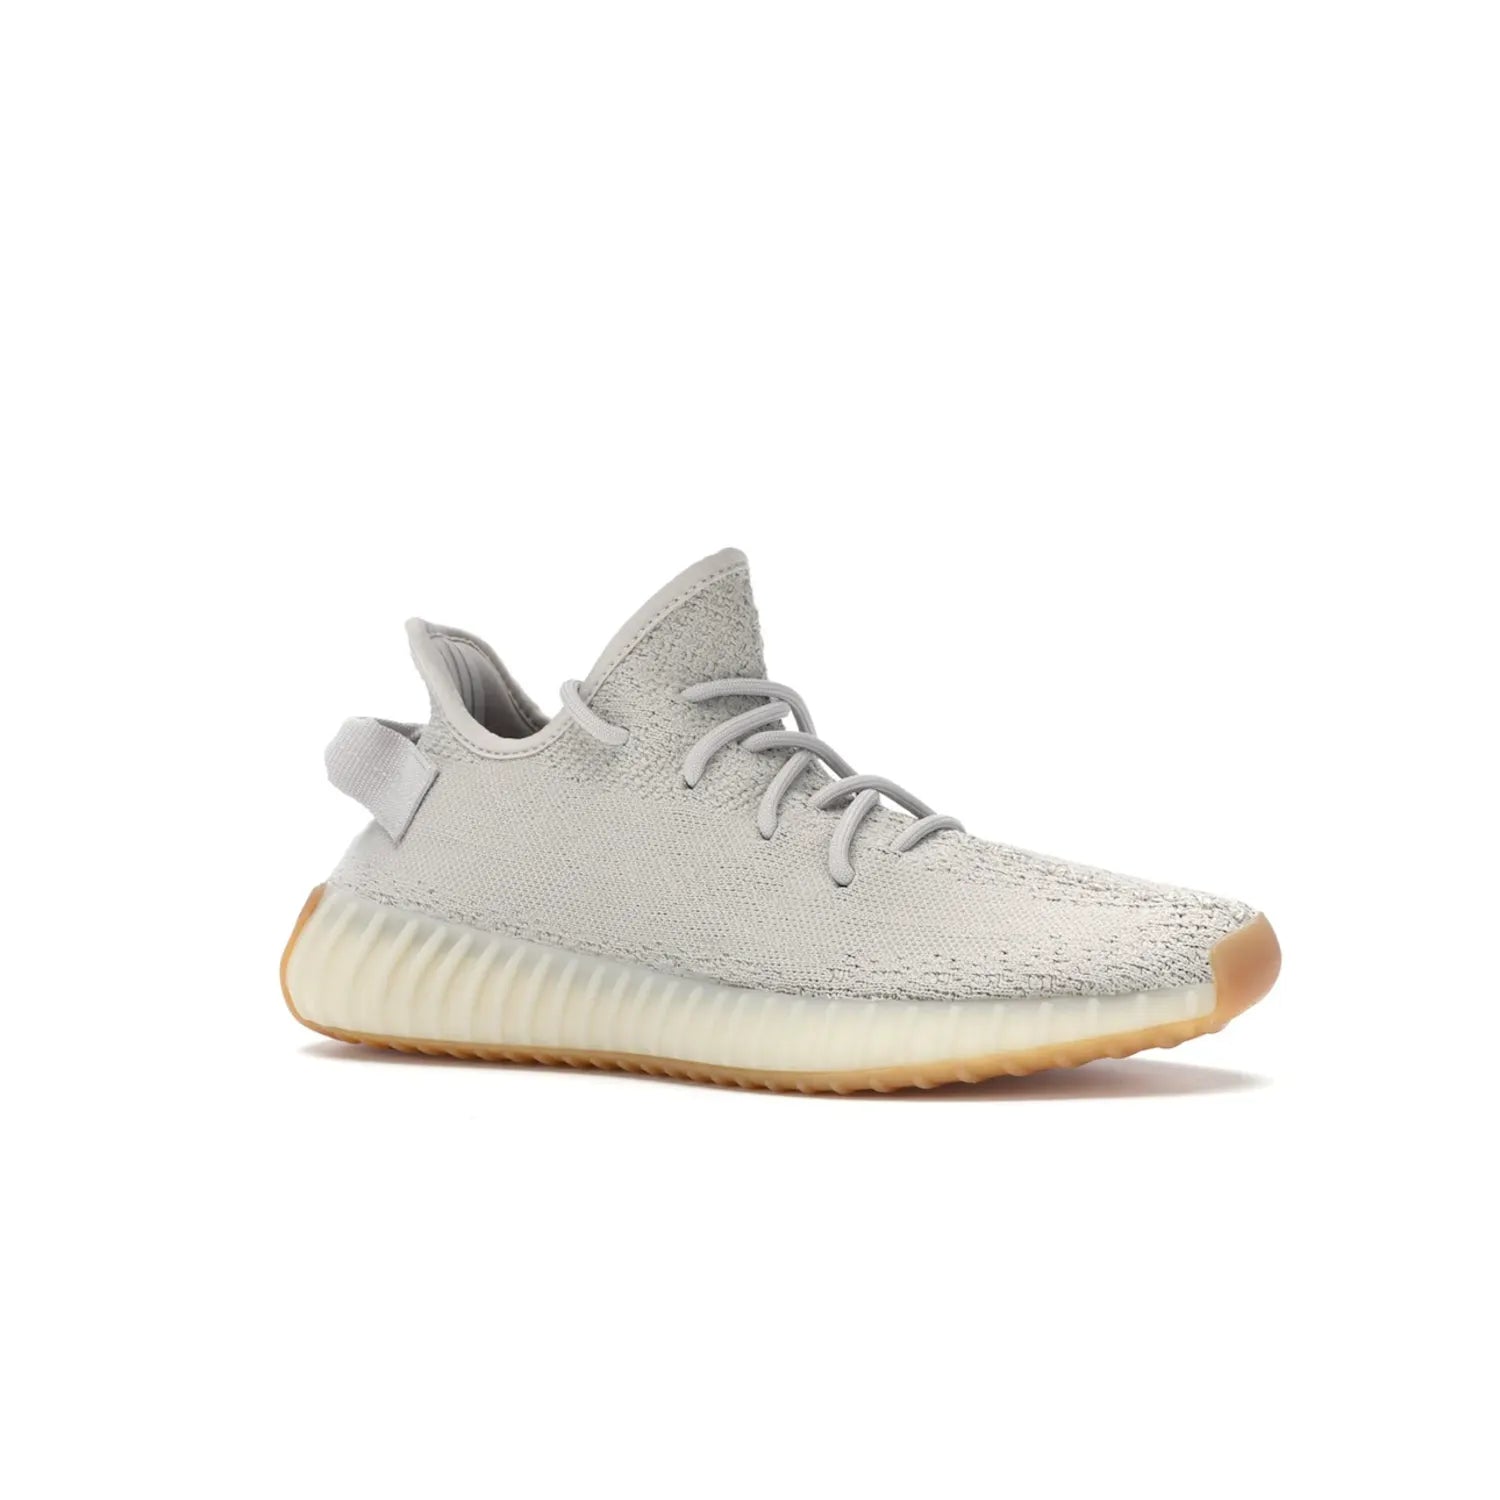 adidas Yeezy Boost 350 V2 Sesame - Image 4 - Only at www.BallersClubKickz.com - Introducing the adidas Yeezy Boost 350 V2 Sesame. Featuring a sesame upper, midsole and gum sole for a sleek silhouette. Cop the stylish sneaker released in November 2018.